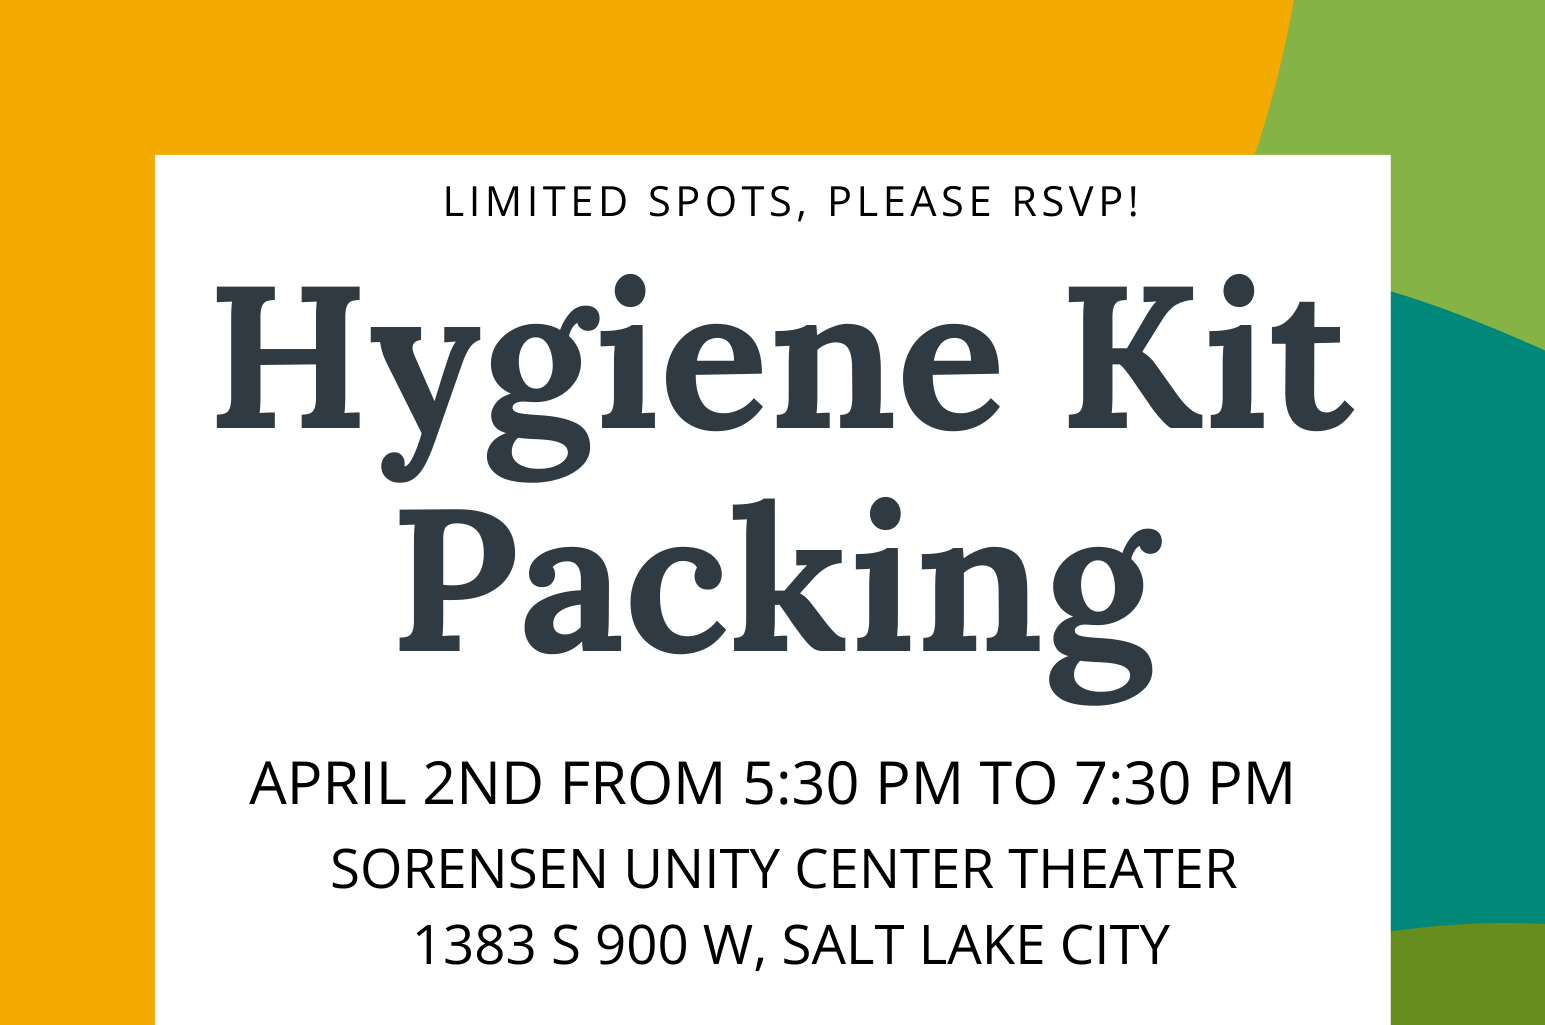 Hygiene Kit Packing and Community BBQ